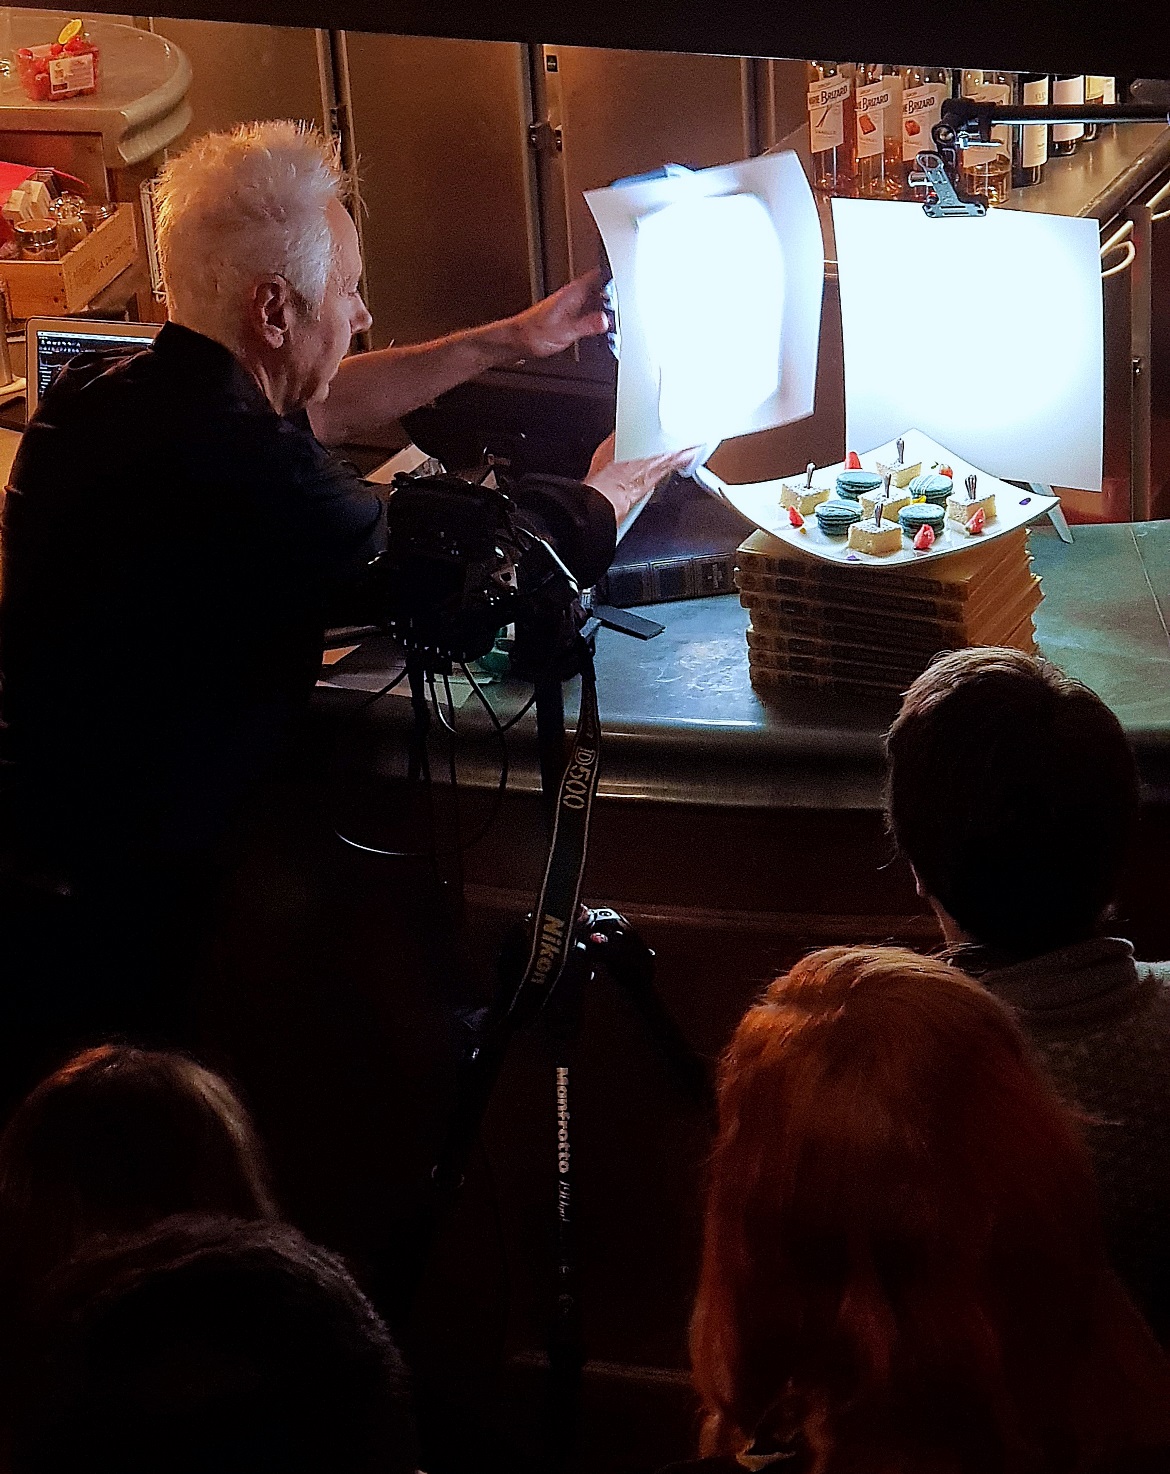 Food photography at Manfrotto Photography Masterclass - November Monthly Recap by BeckyBecky Blogs